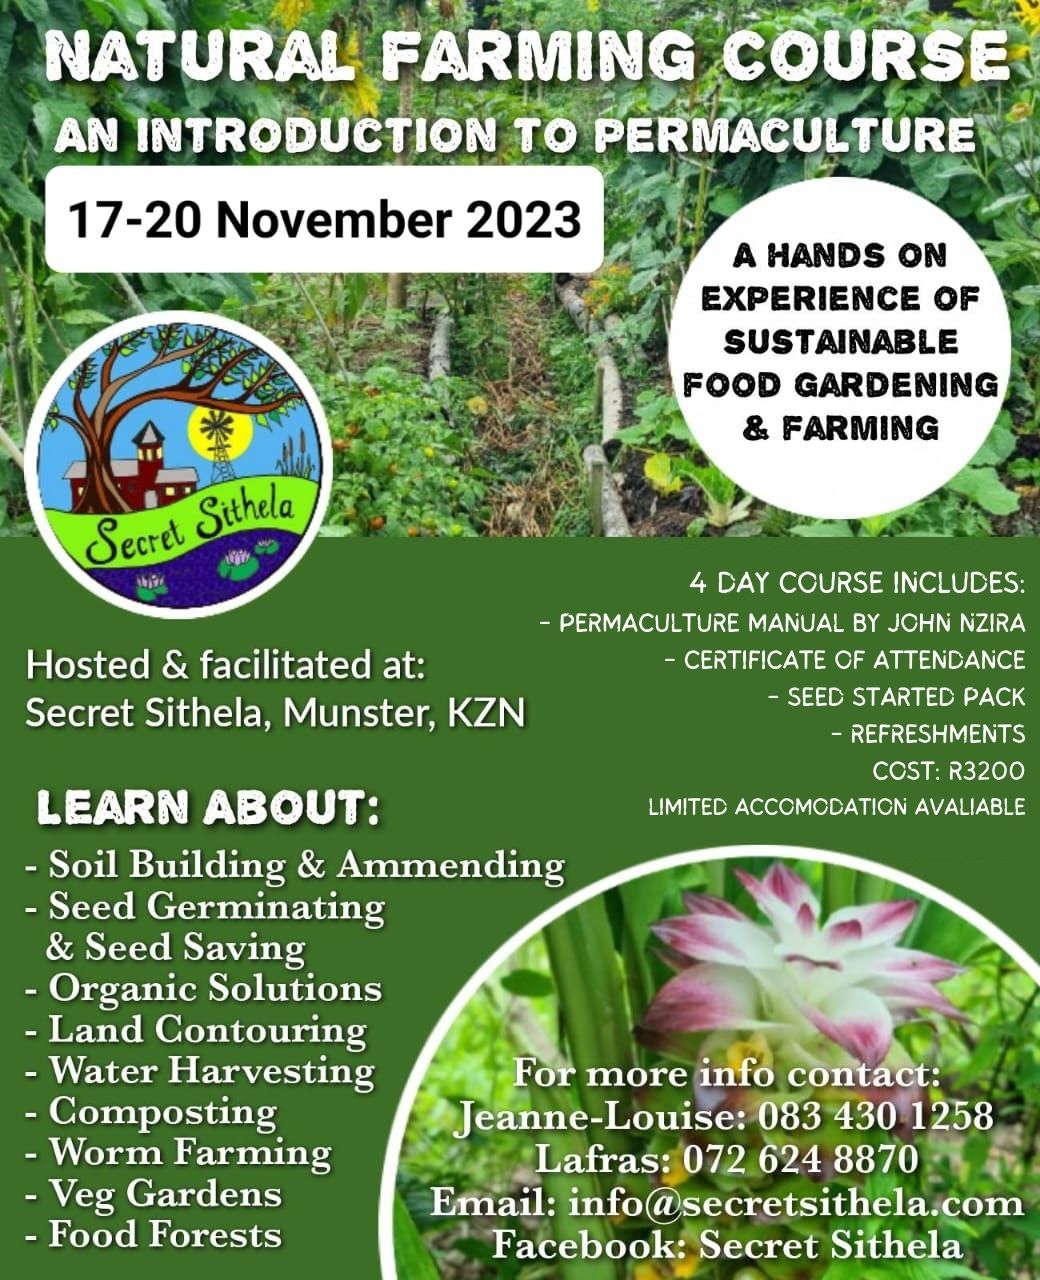 Natural Farming Course -Food gardening and farming